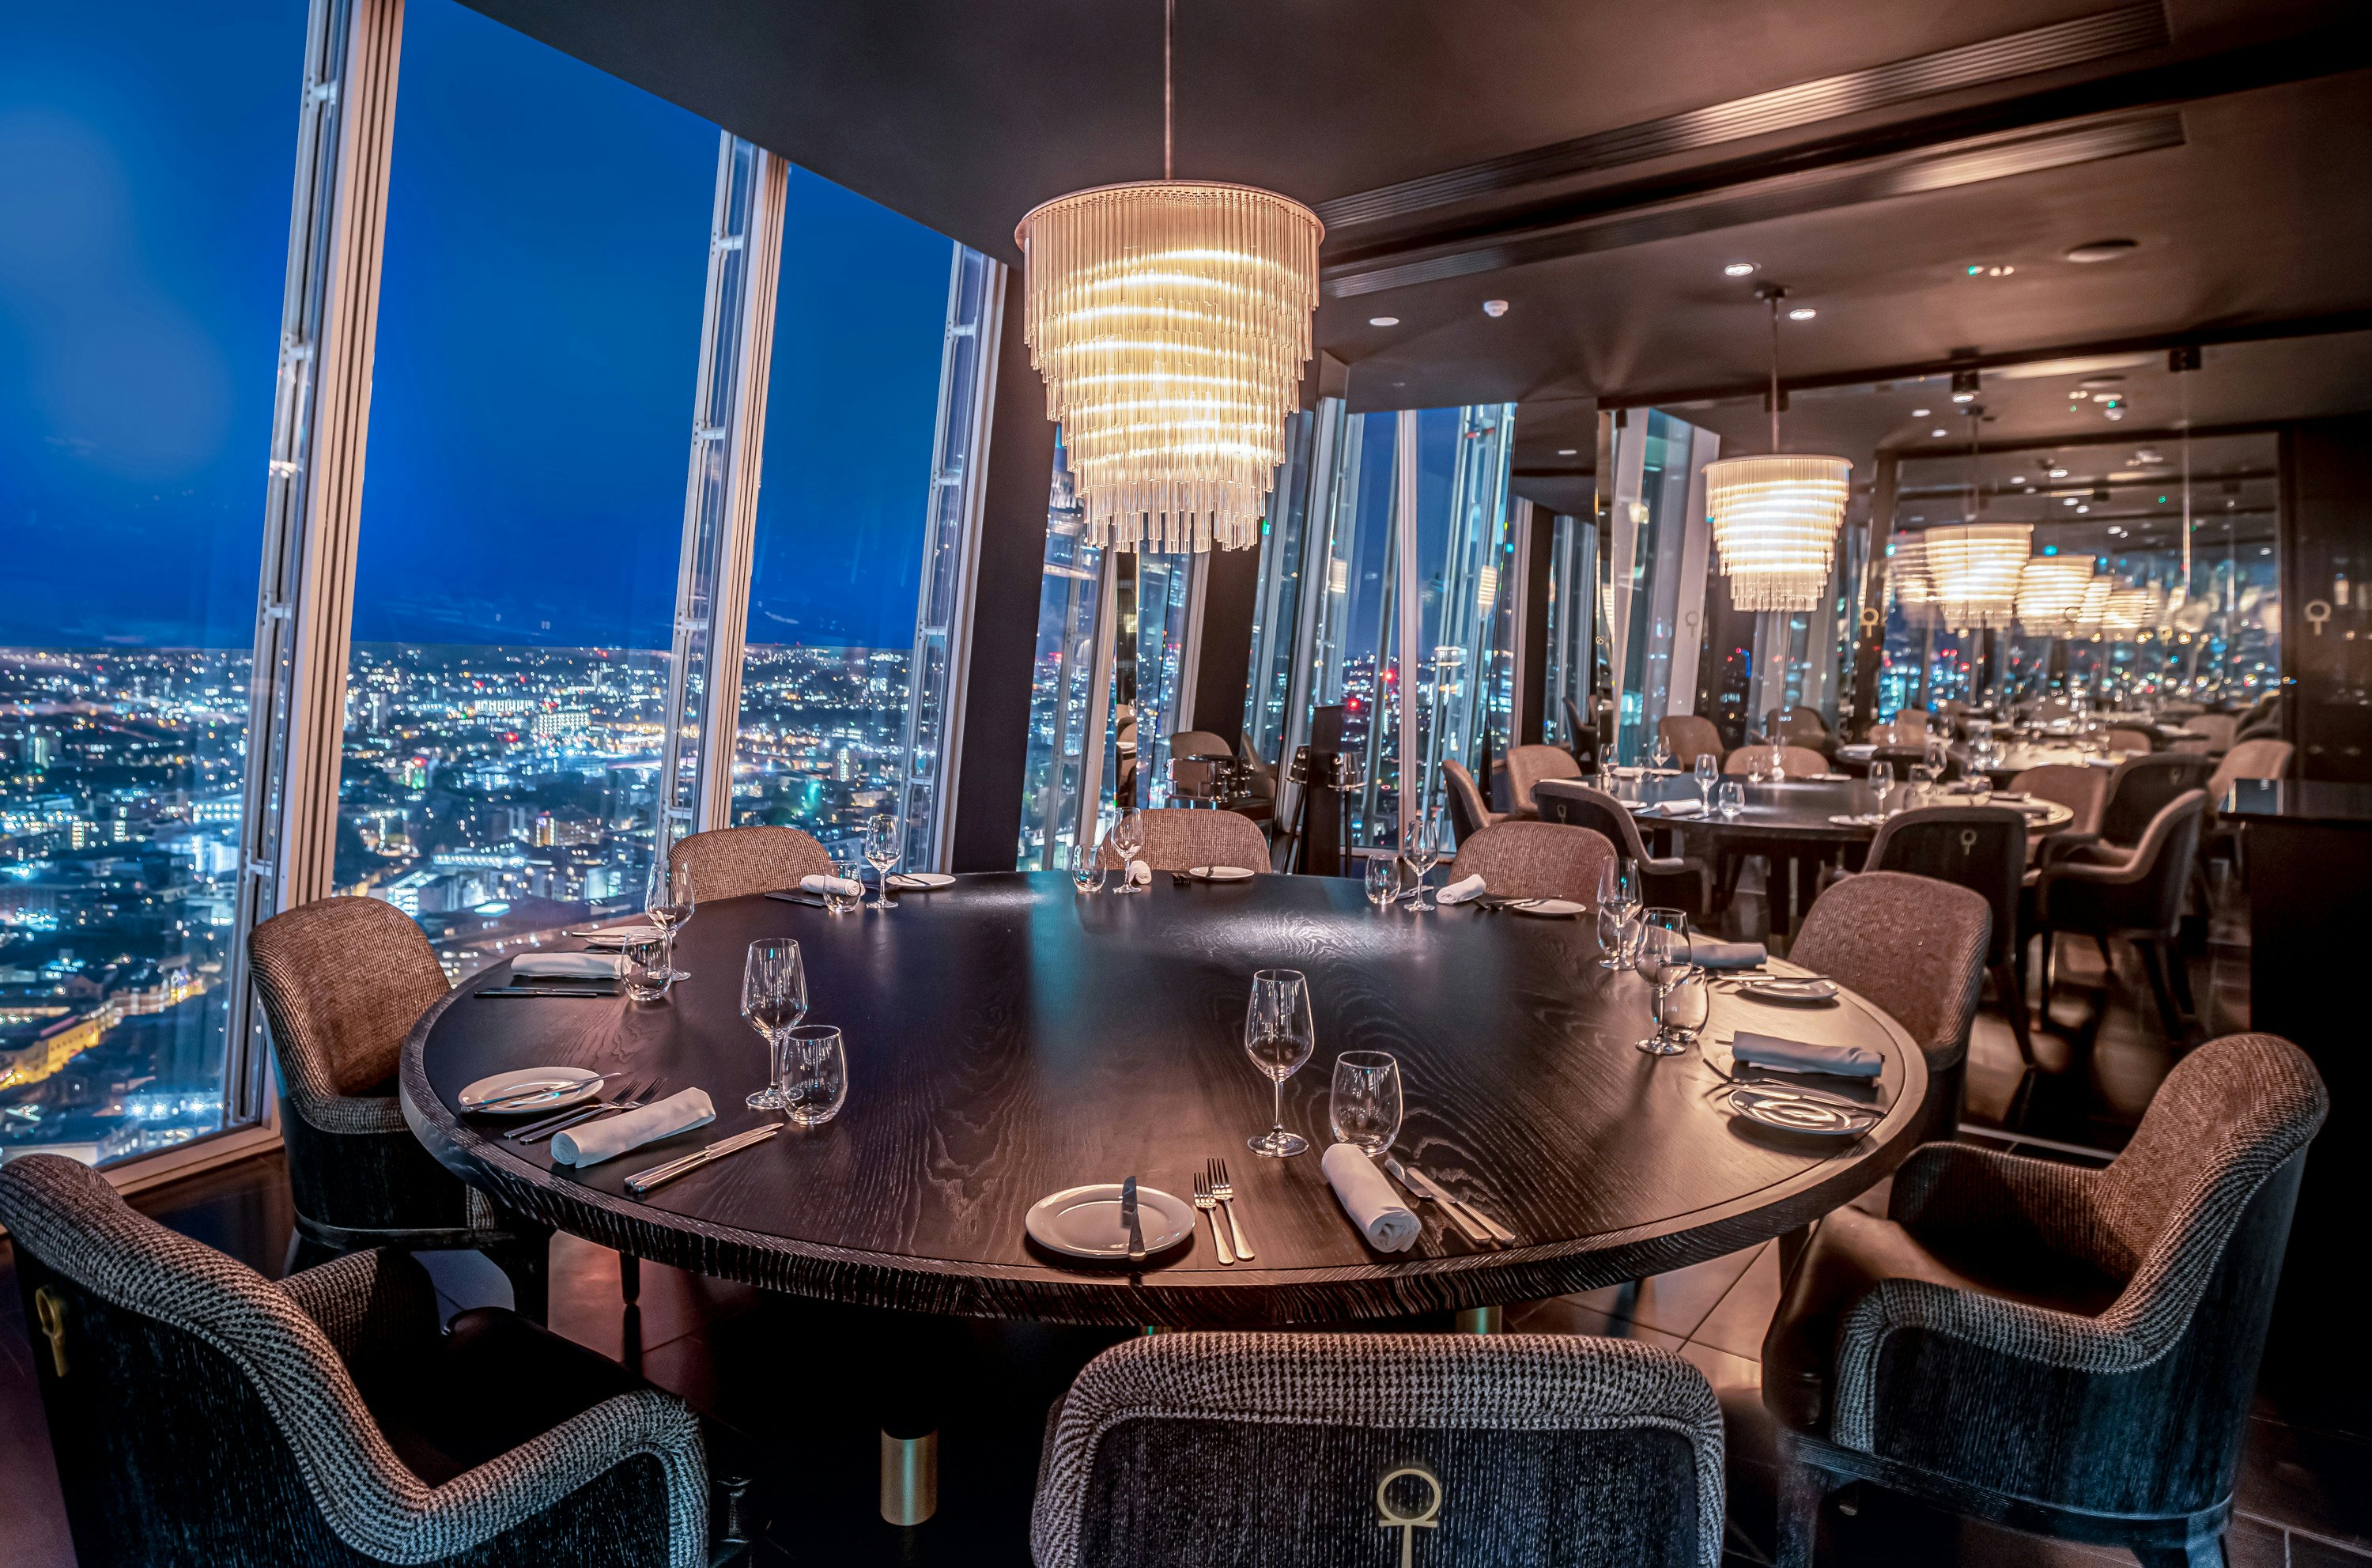 Engagement Party Venues in Central London - Aqua Shard